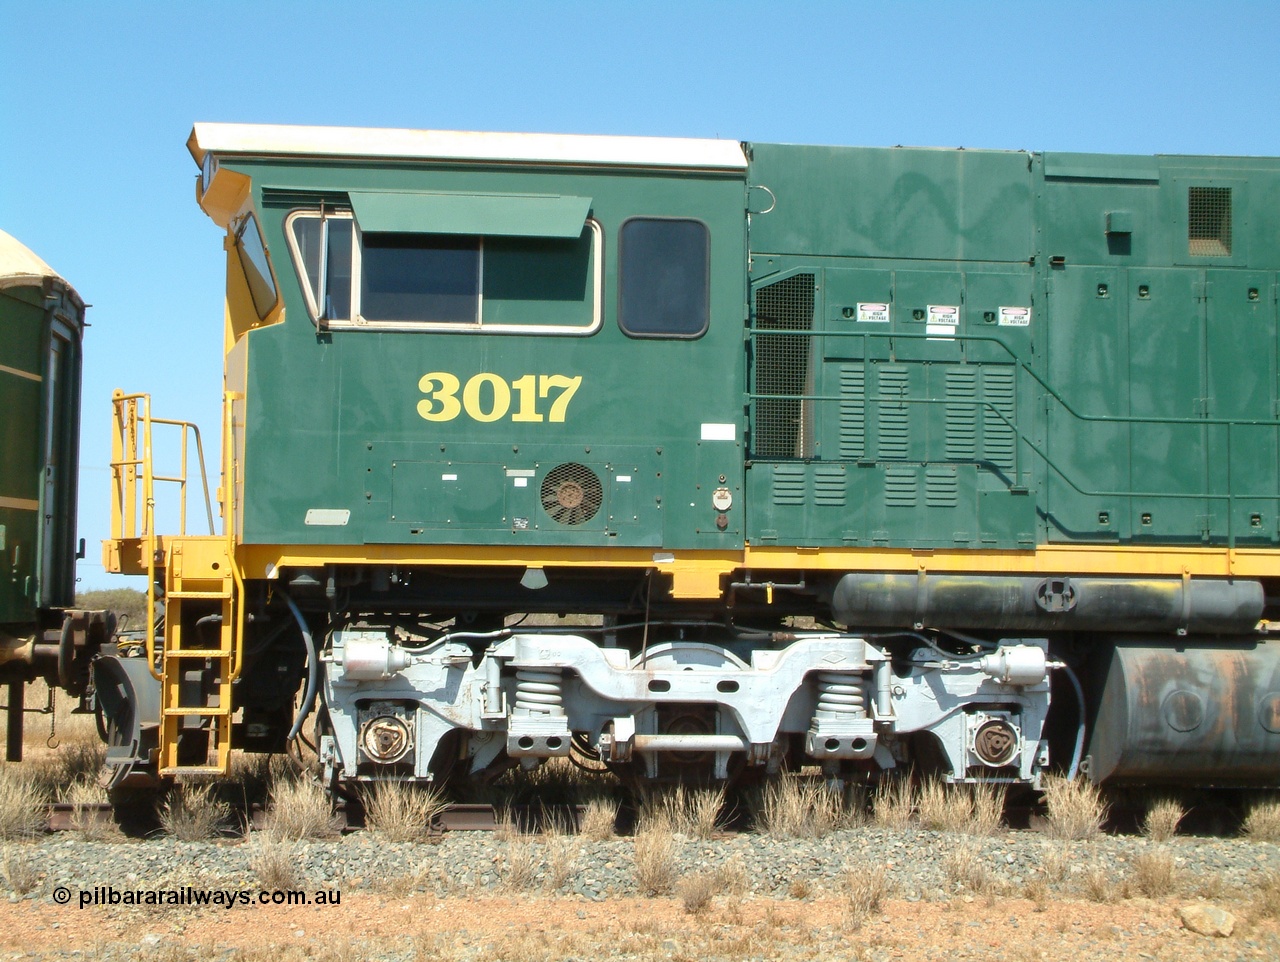 041014 142239
Pilbara Railways Historical Society, Comeng WA ALCo rebuild C636R locomotive 3017 serial WA-135-C-6043-04. The improved Pilbara cab was fitted as part of the rebuild in April 1985. Donated to Society in 1996. 14th October 2004.
Keywords: 3017;Comeng-WA;ALCo;C636R;WA-135-C-6043-04;rebuild;